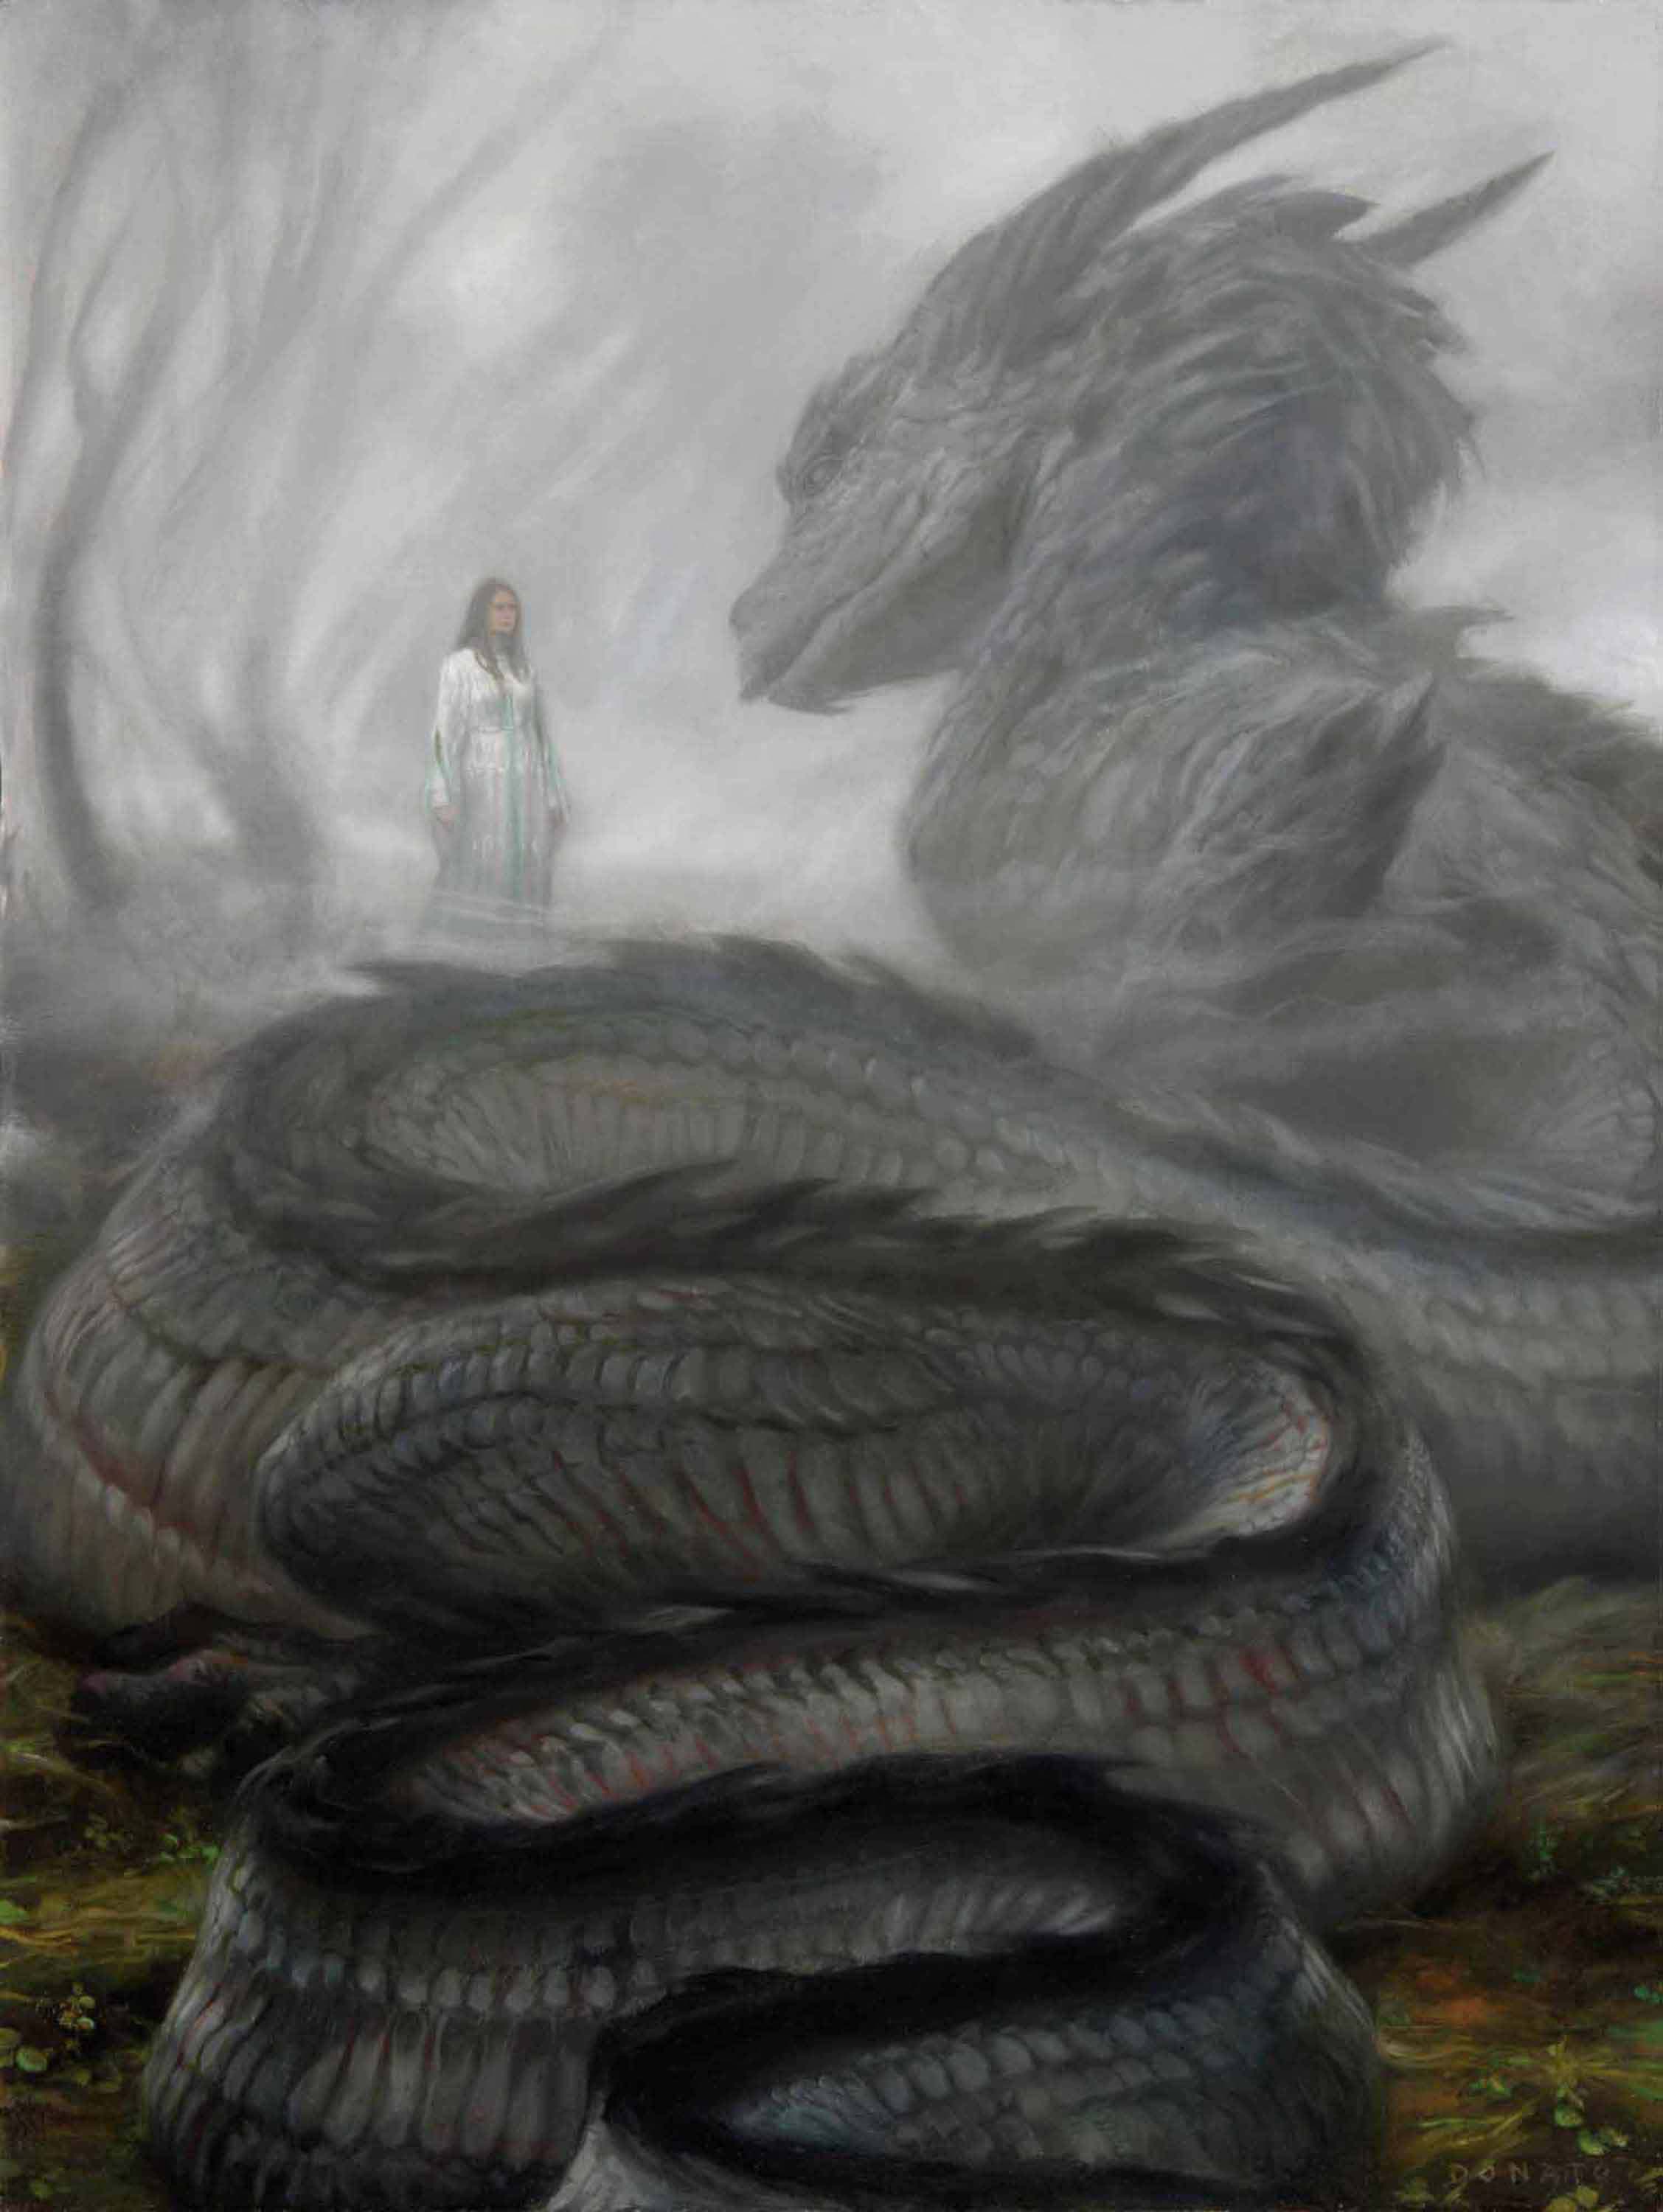 Forgetfulness
24" x 18"  Oil on Panel  2013
Nienor and Glaurung on the hill Amon Ethir
collection of Chris Redlich